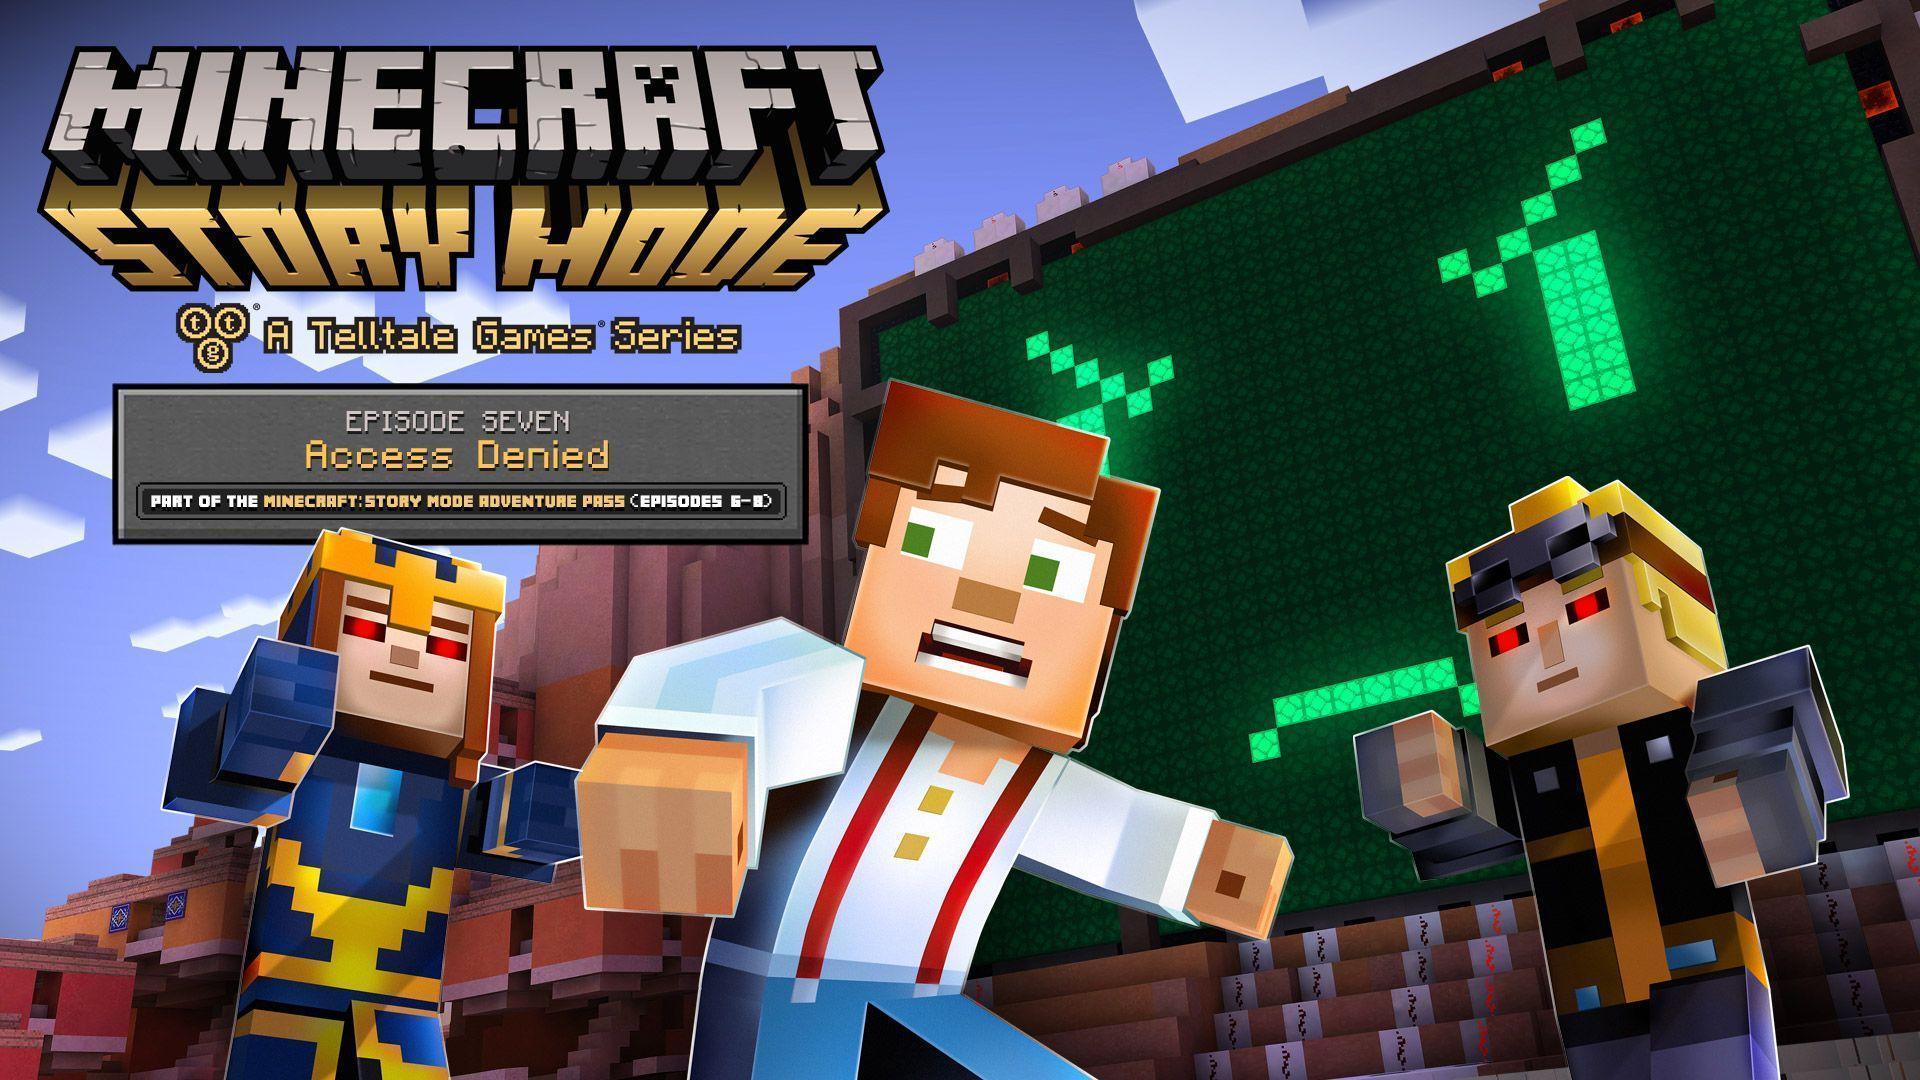 Minecraft: Story Mode Wallpapers - Wallpaper Cave